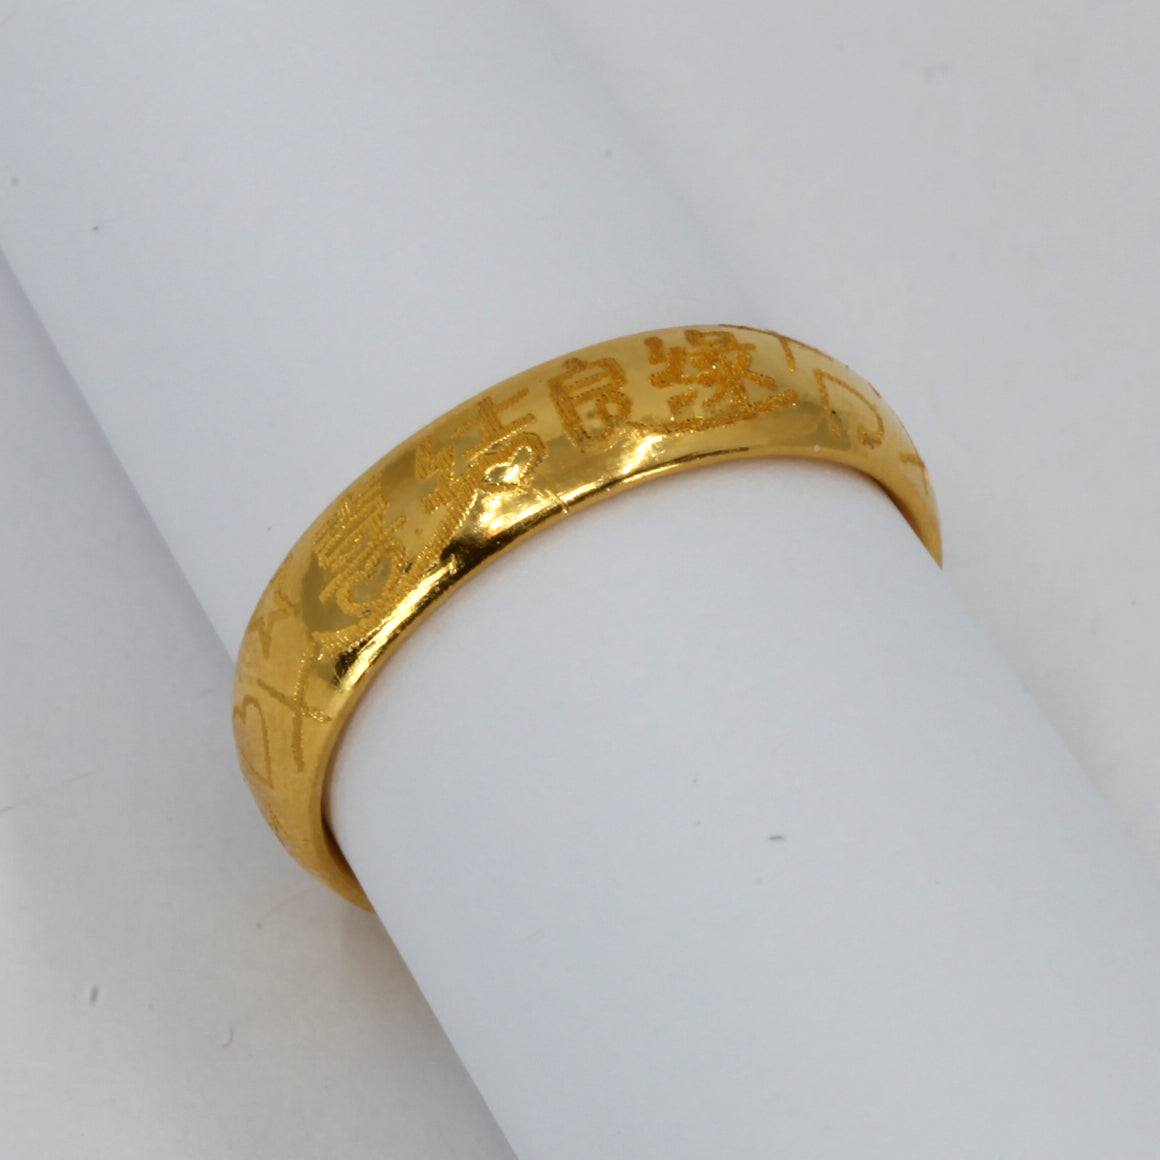 24K Solid Yellow Gold Wedding Band Ring 喜结良缘 Tie The Knot 7.5 Grams